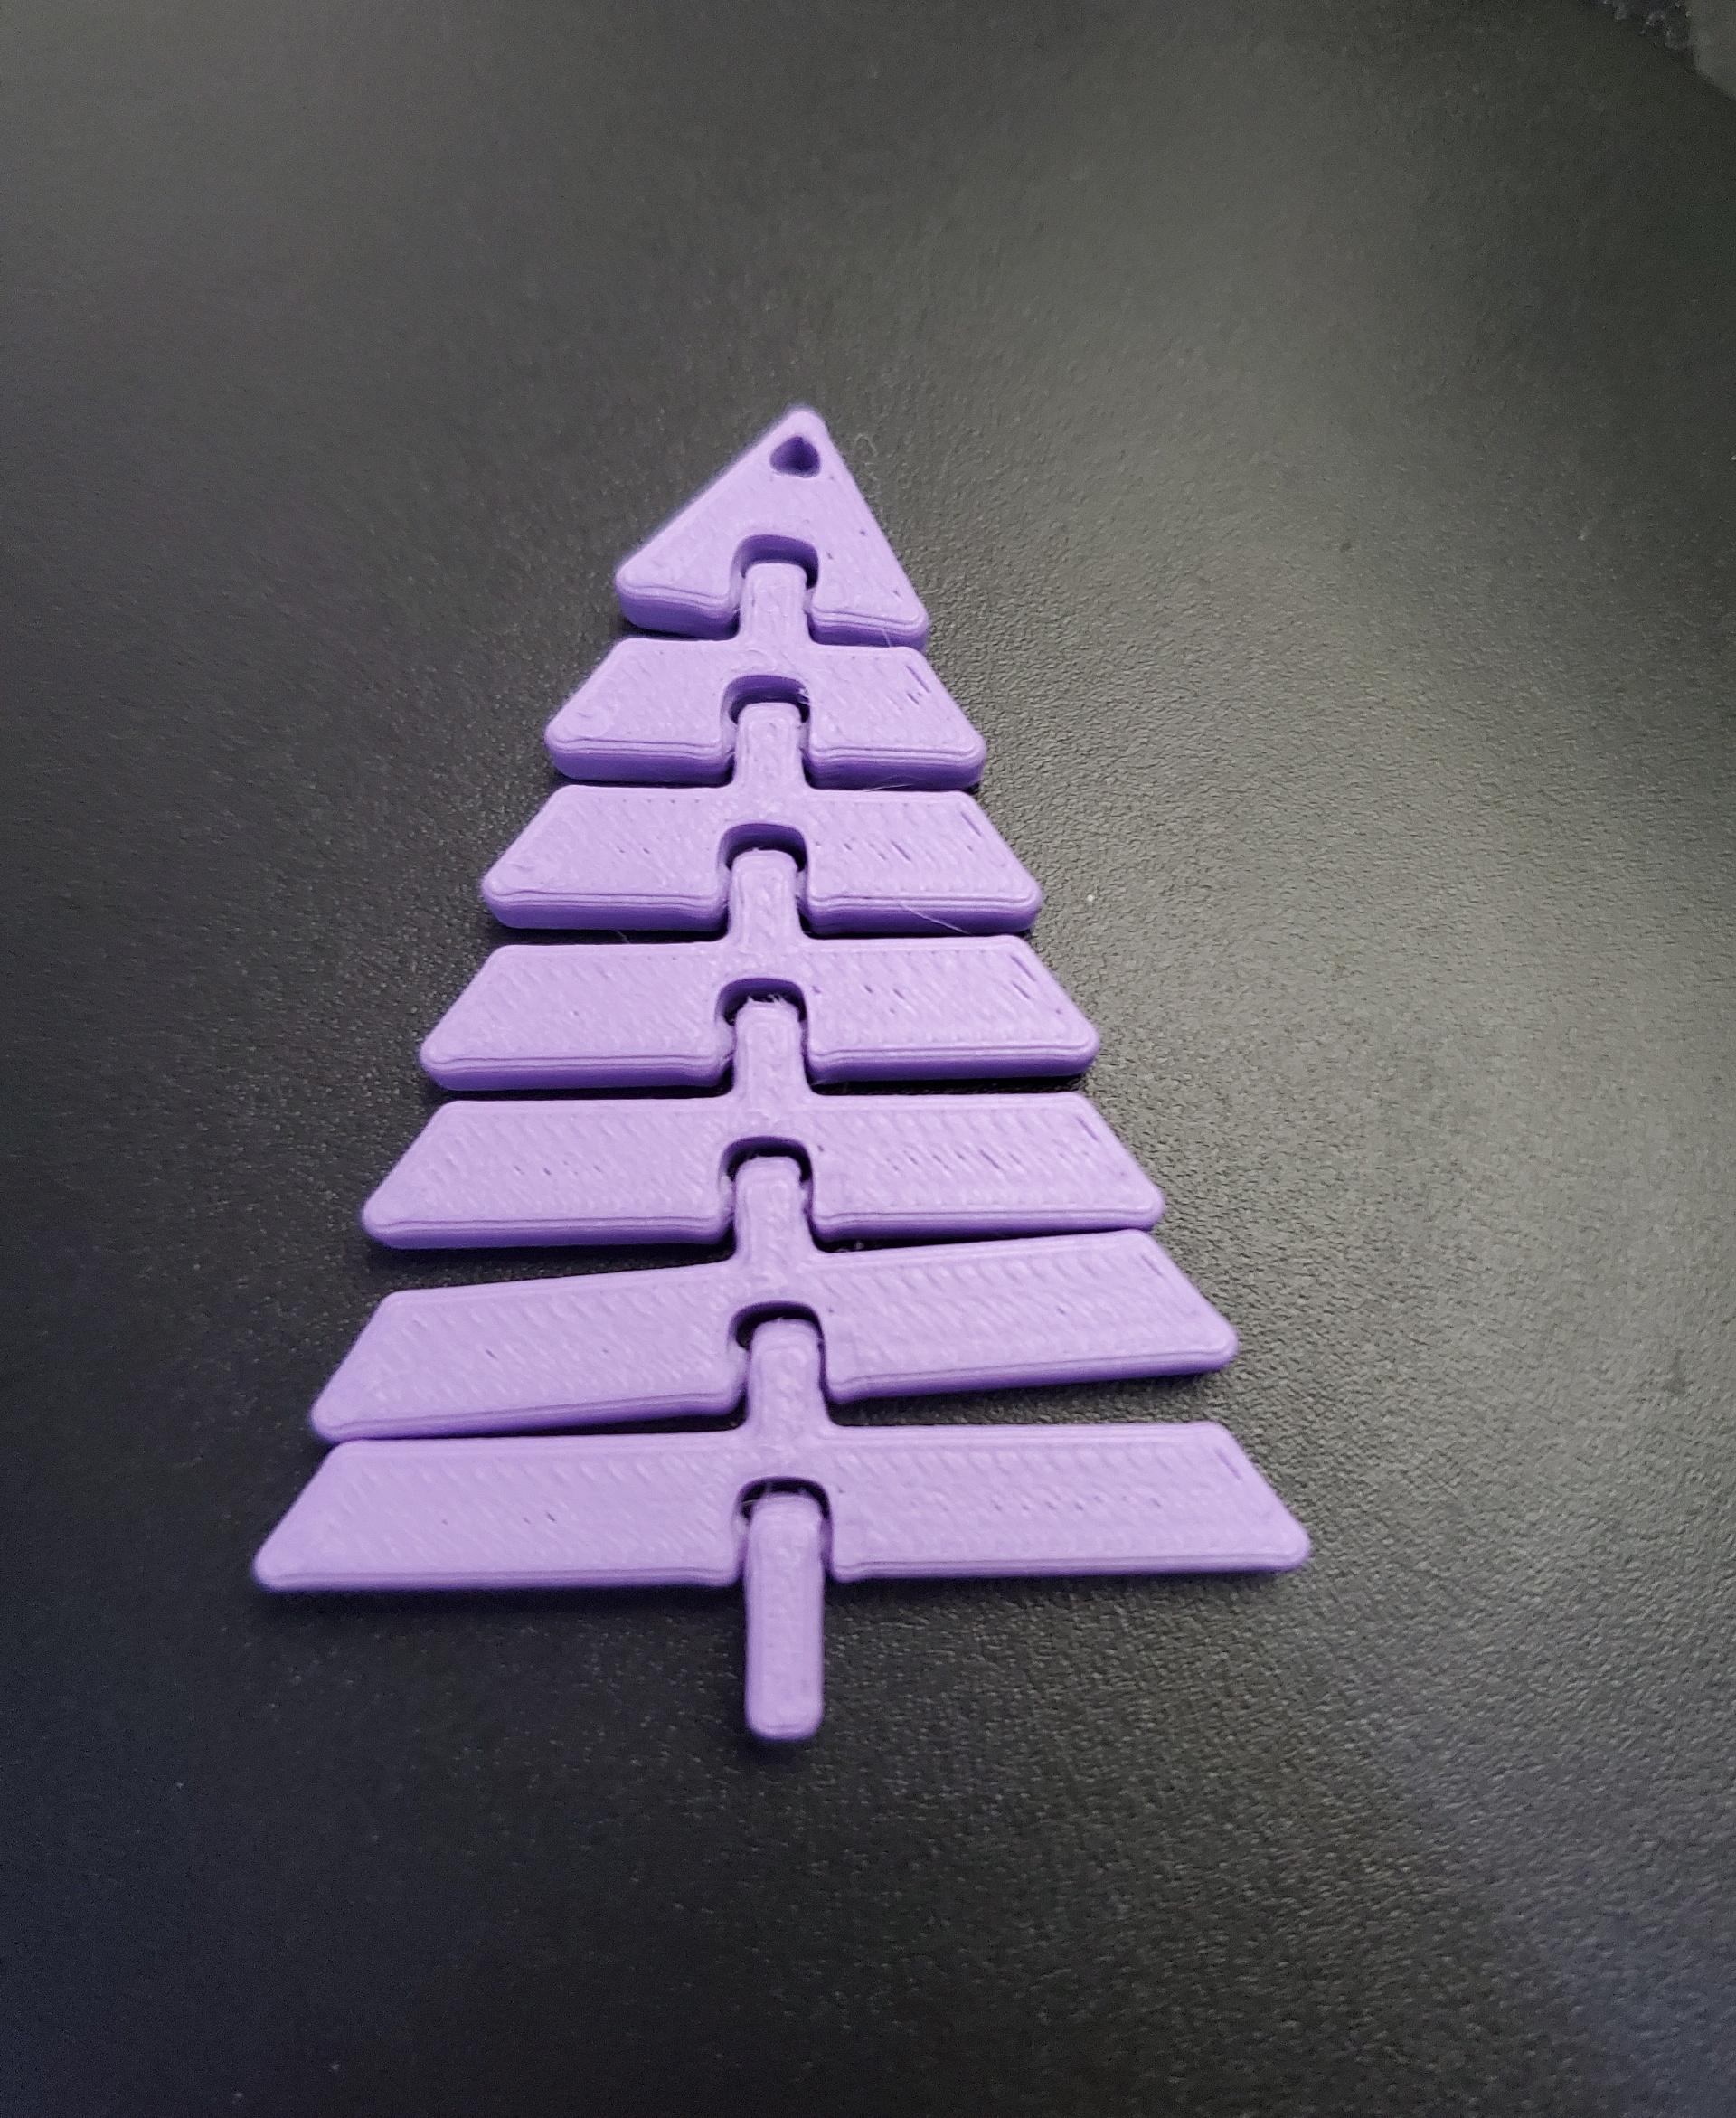 Articulated Christmas Tree Keychain - Print in place fidget toy - polyterra lavender  - 3d model